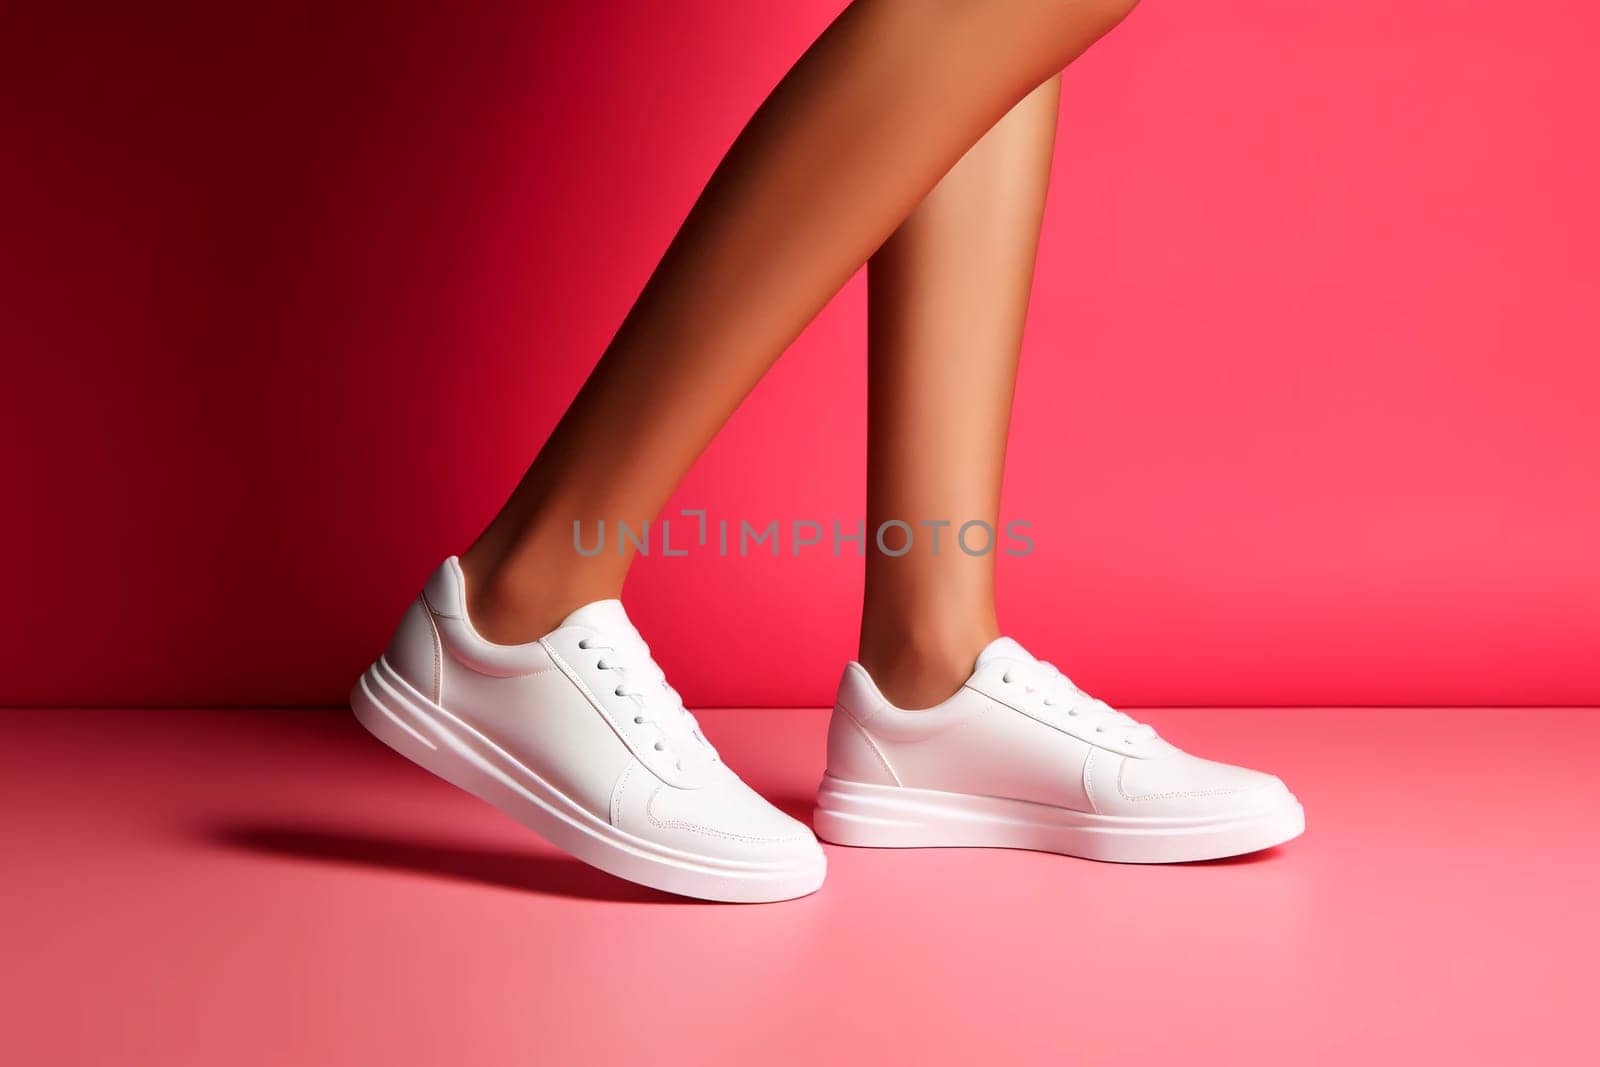 Female legs in white sneakers close-up on a pink background.